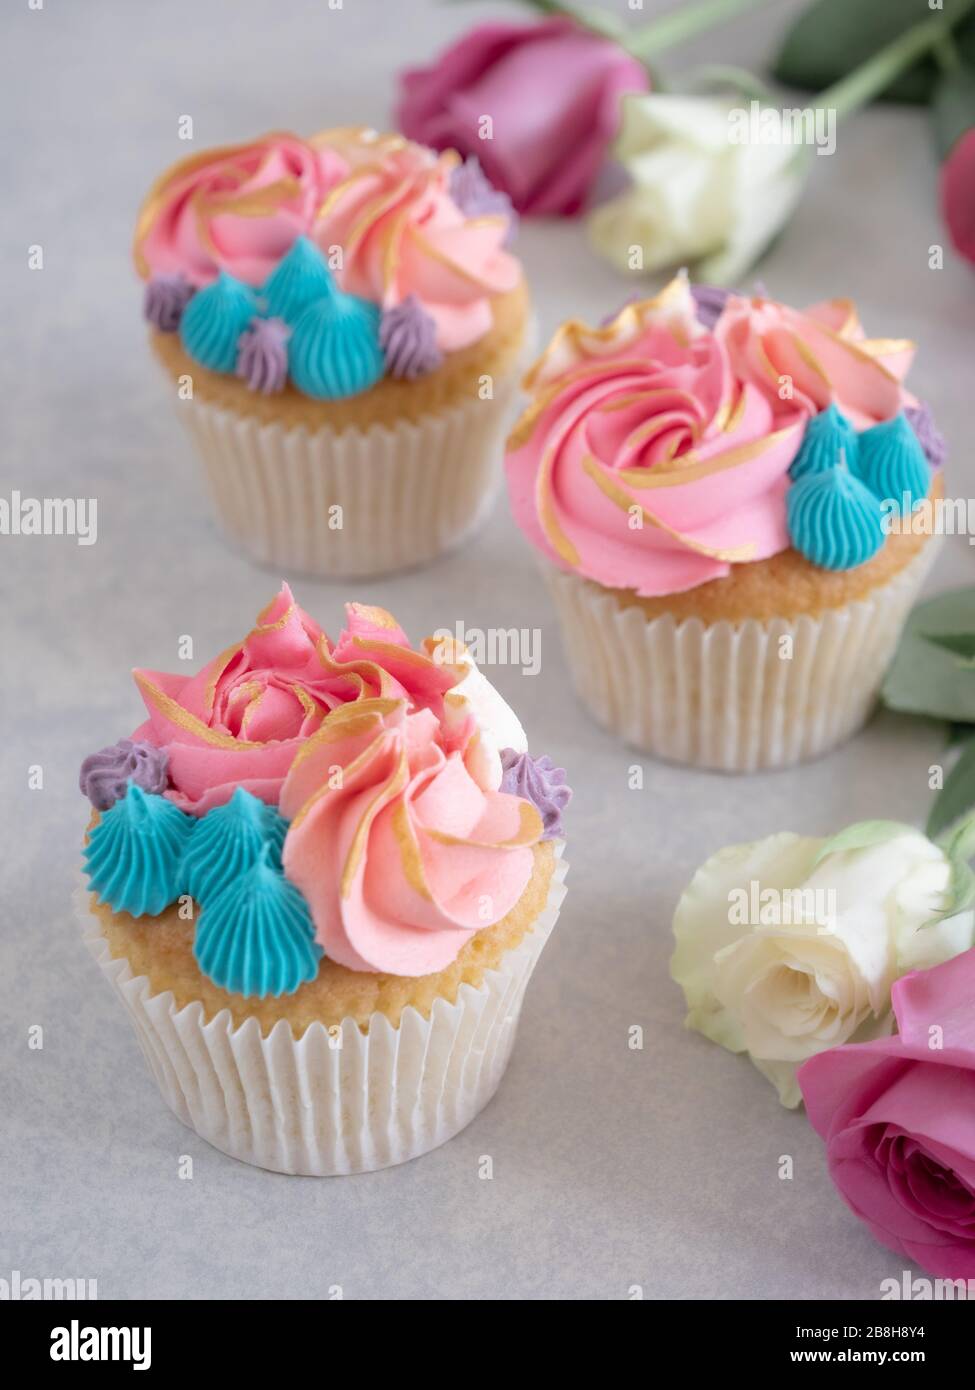 Three cupcakes with beautiful frosting among some roses on a tabletop Stock Photo